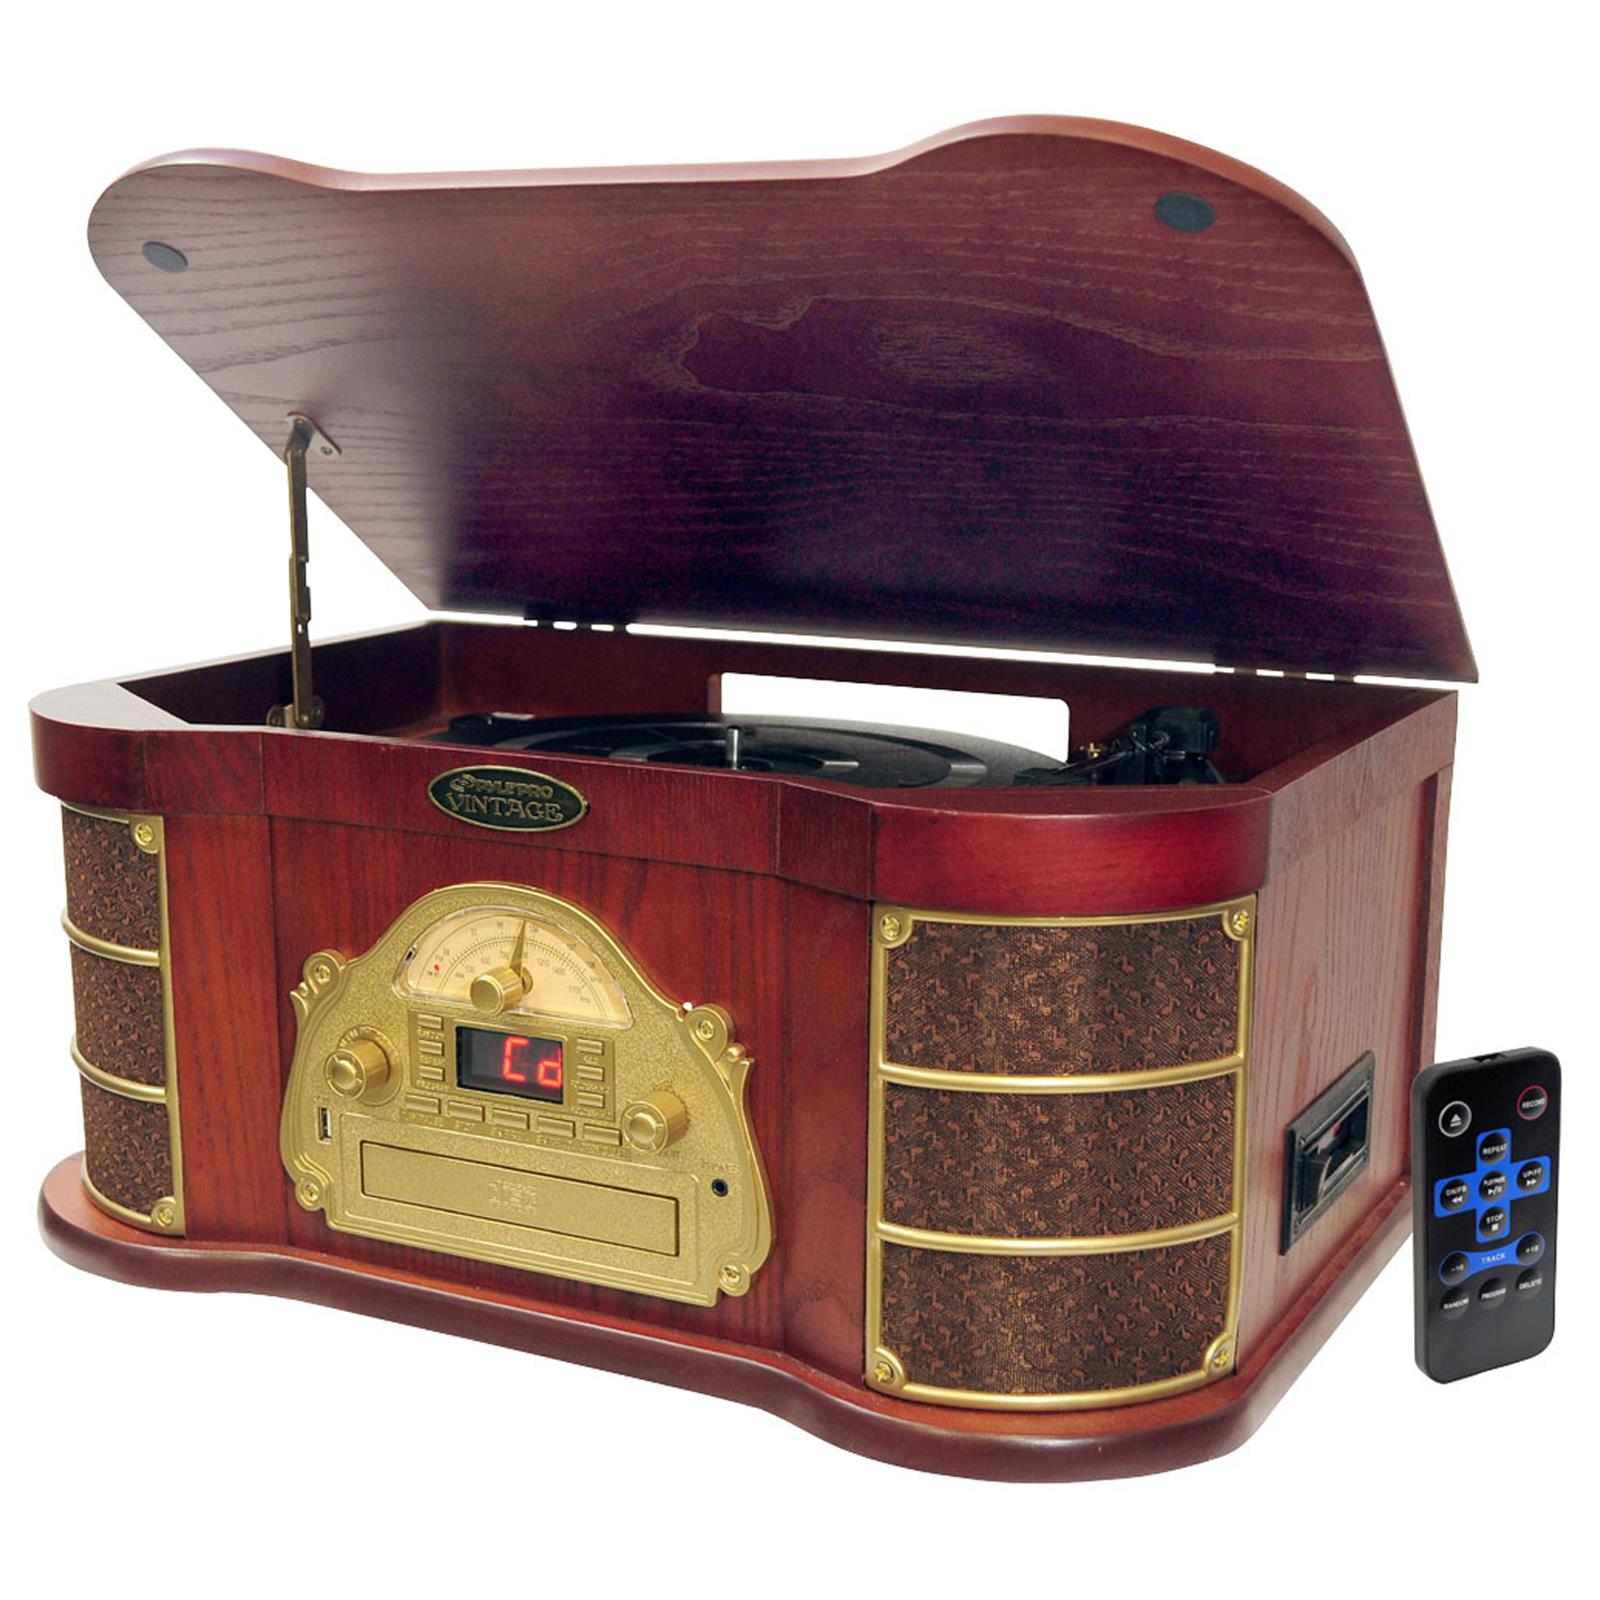 Pyle Classical Turntable with AM/FM Radio CD/Cassette & USB Recording